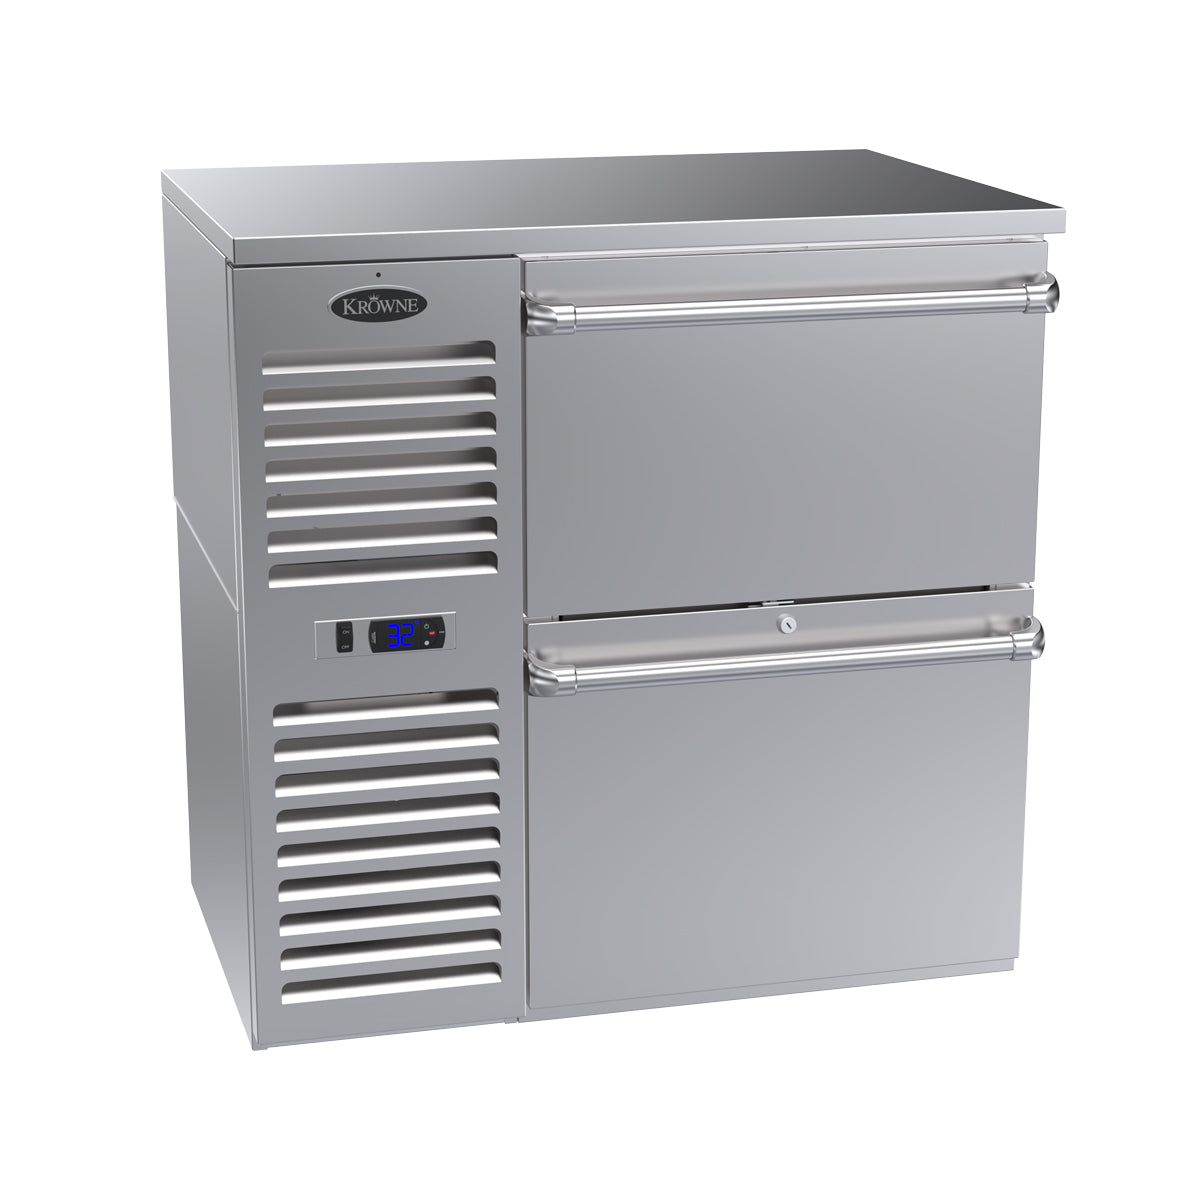 Krowne | 36" Wide 2 Drawer Self Contained Stainless Steel Reach-In Back Bar